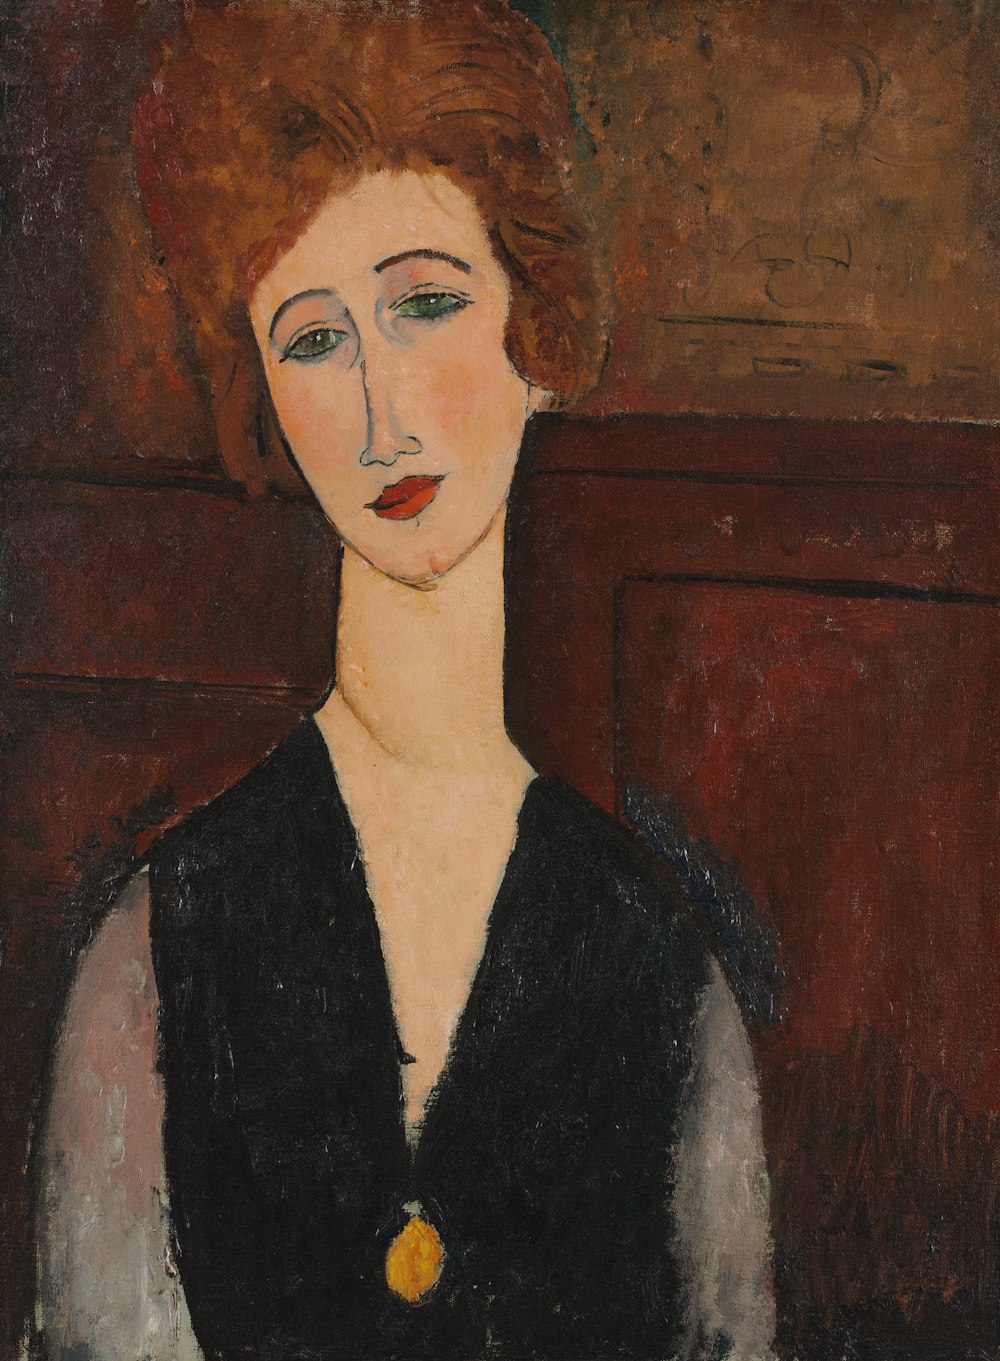 a painting of a woman with red hair